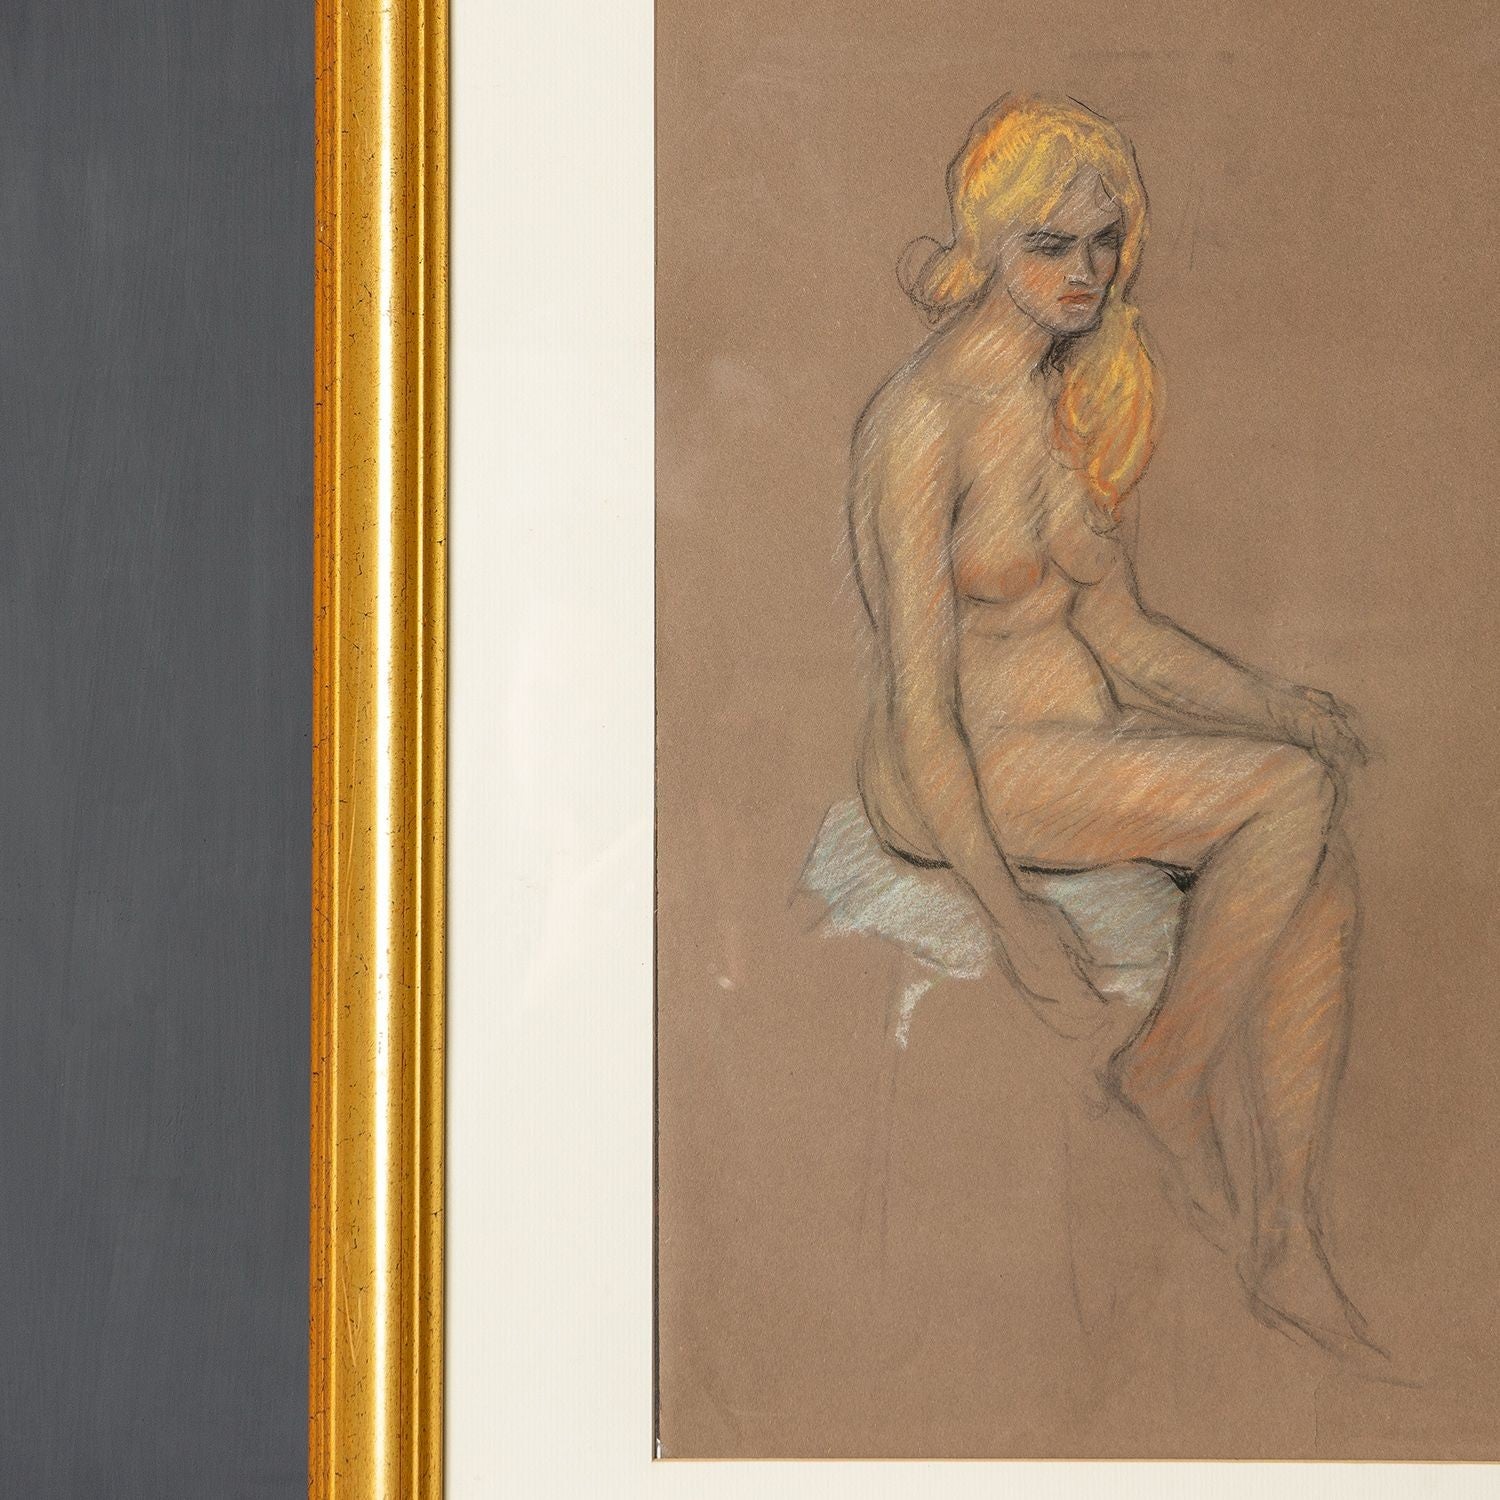 Original Framed Figurative Nude Study in Pastel, Early-Mid 20th Century
Bags of character, the artist really has captured the emotion of the sitter who seems really quite pissed off!

Unsigned but very skilfully executed by a talented hand.

Framed